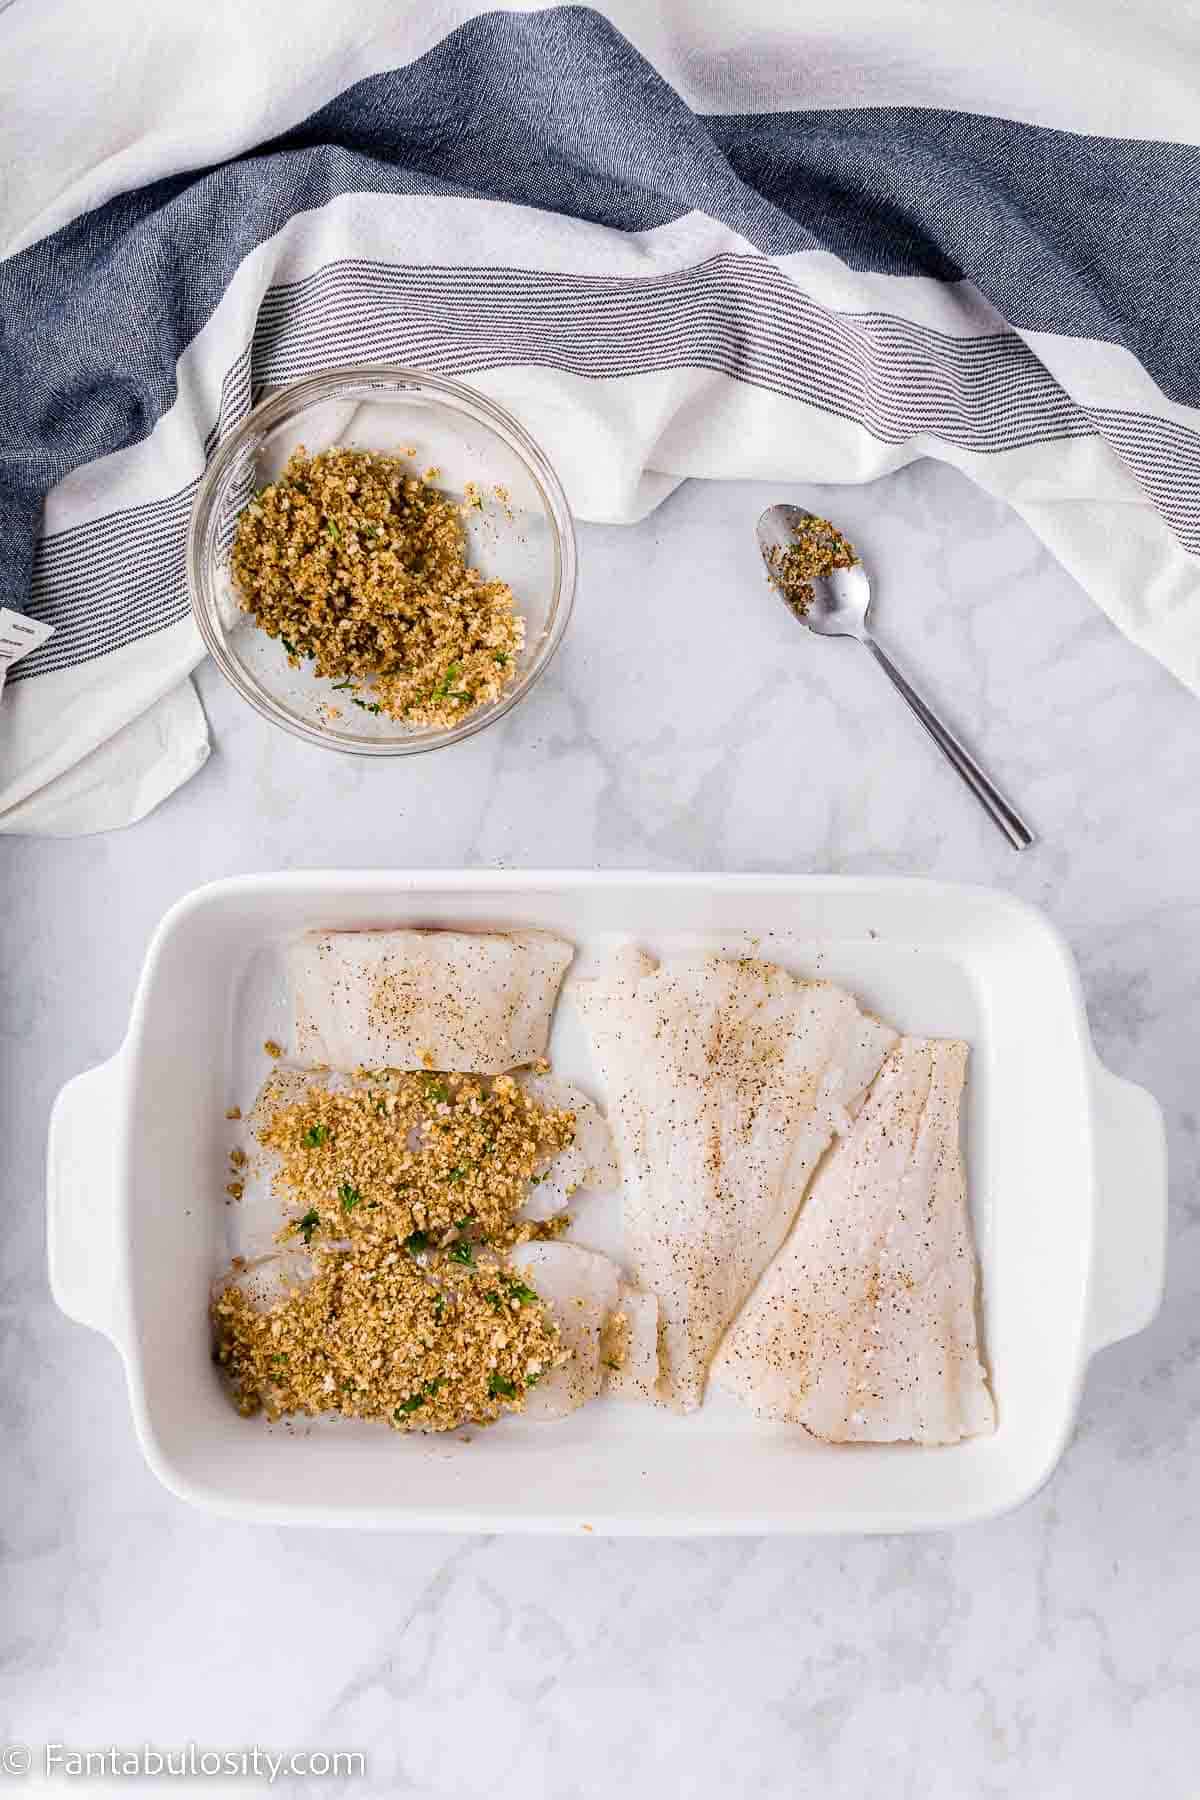 Raw cod filets in baking dish with panko and seasonings being added on top.